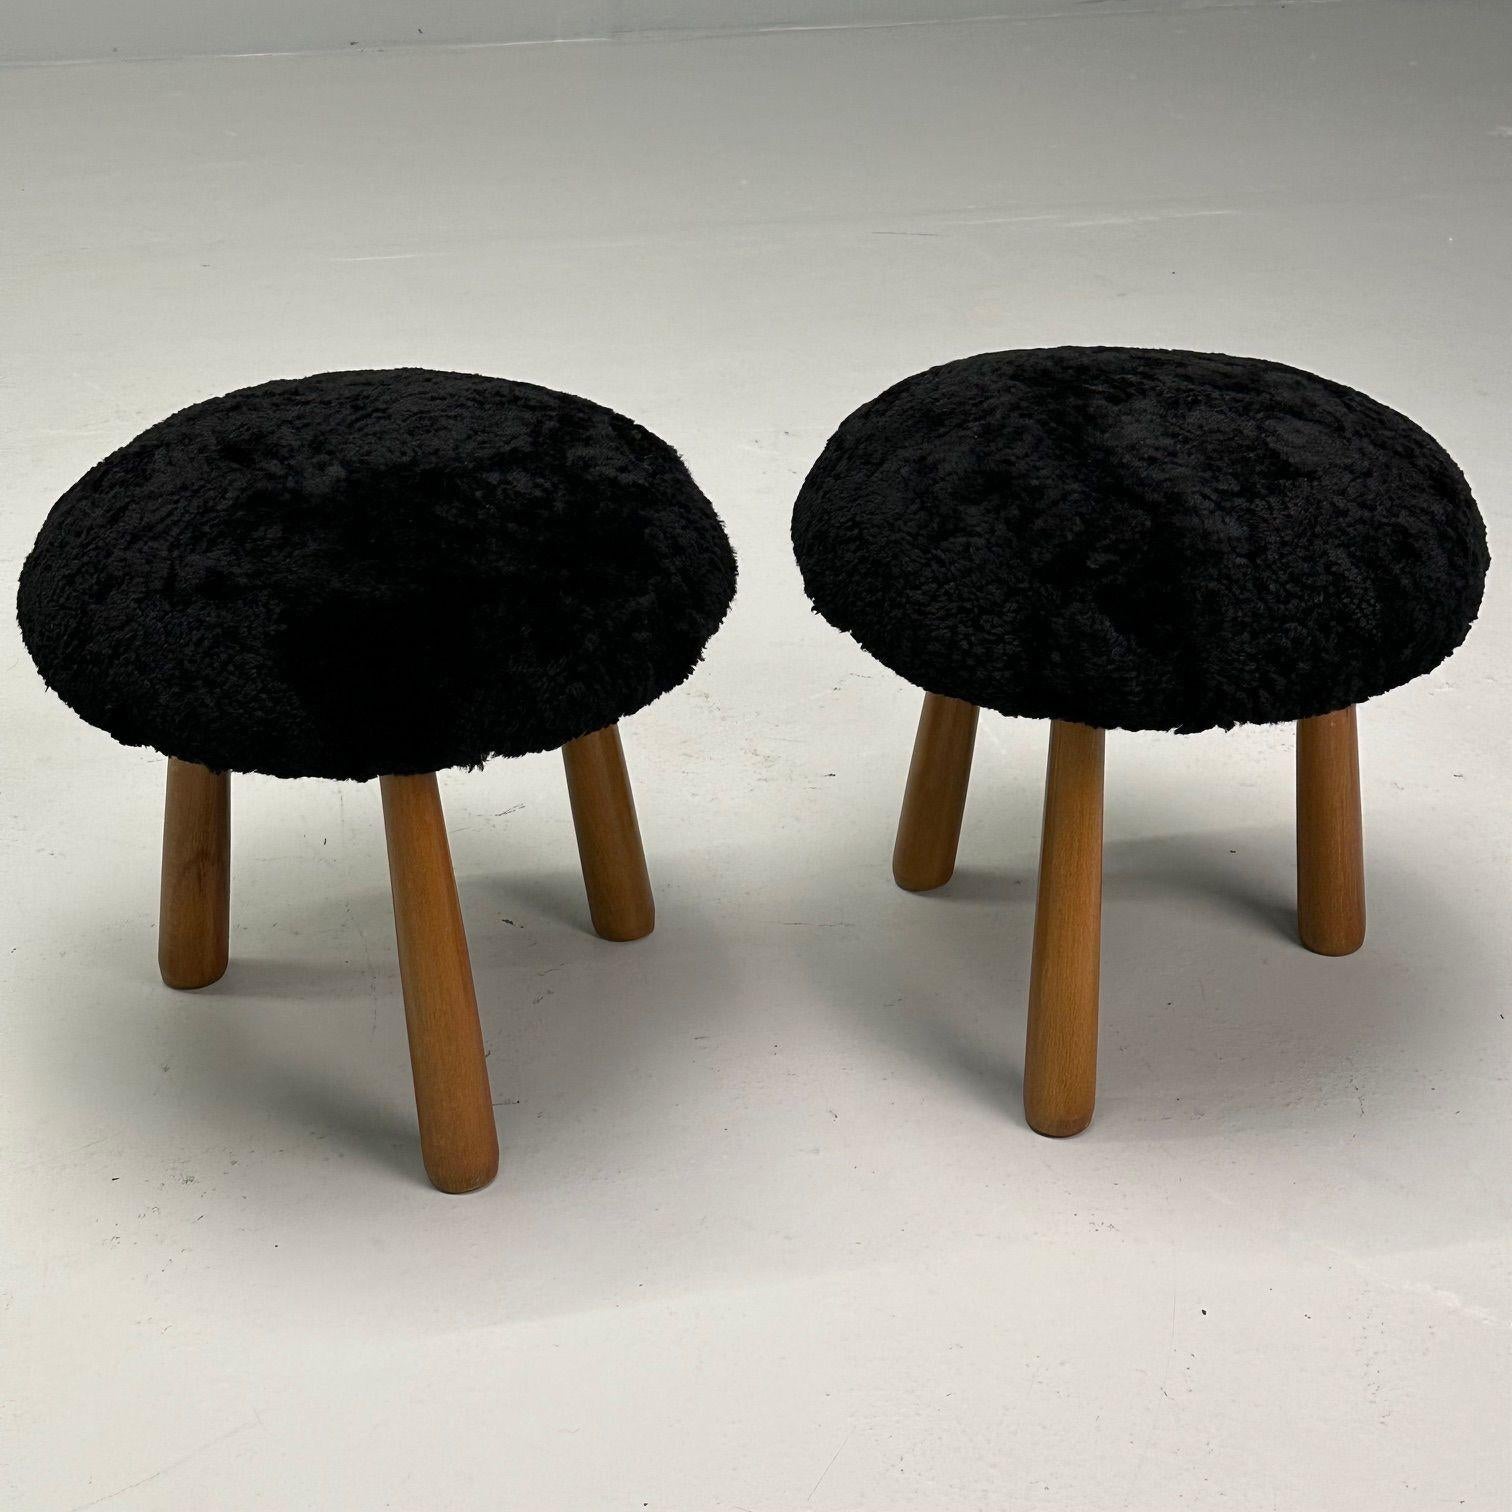 Contemporary, Swedish Mid-Century Style, Tripod Stools, Black Sheepskin In Excellent Condition For Sale In Stamford, CT